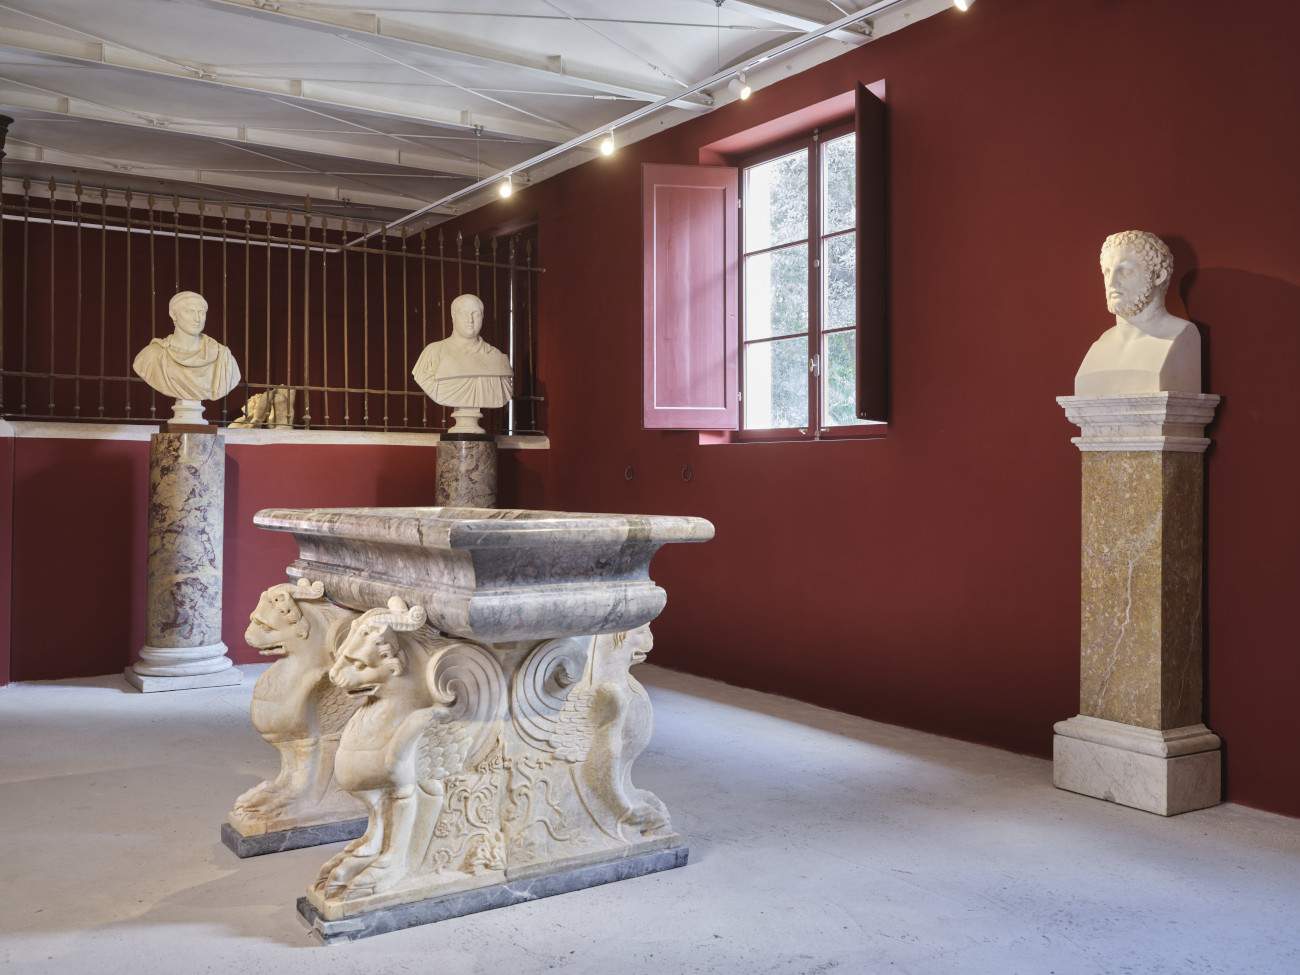 The Torlonia Foundation opens the Antiquarium and displays sculptures from the recently restored collection